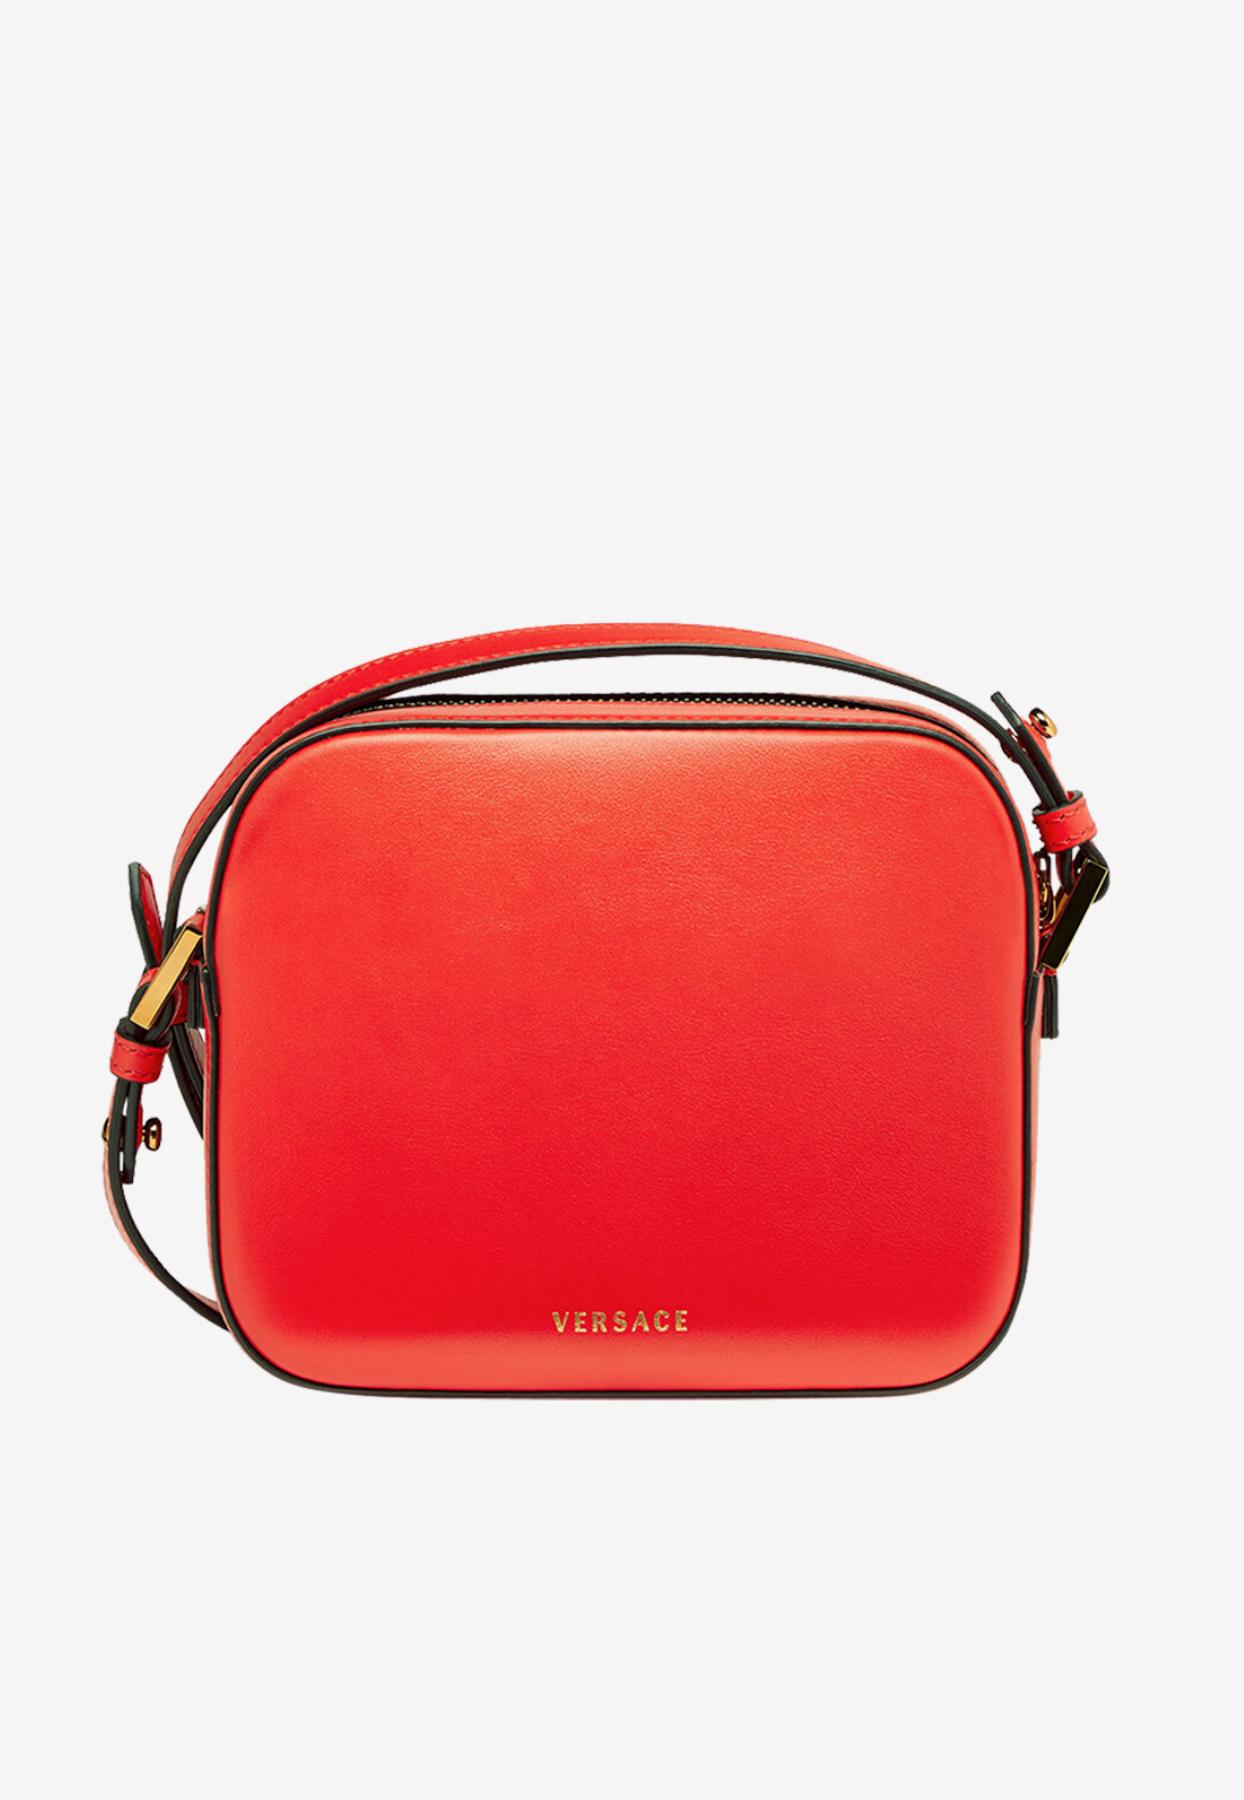 Sold at Auction: Versace Red Leather Virtus Tote/Shoulder Bag